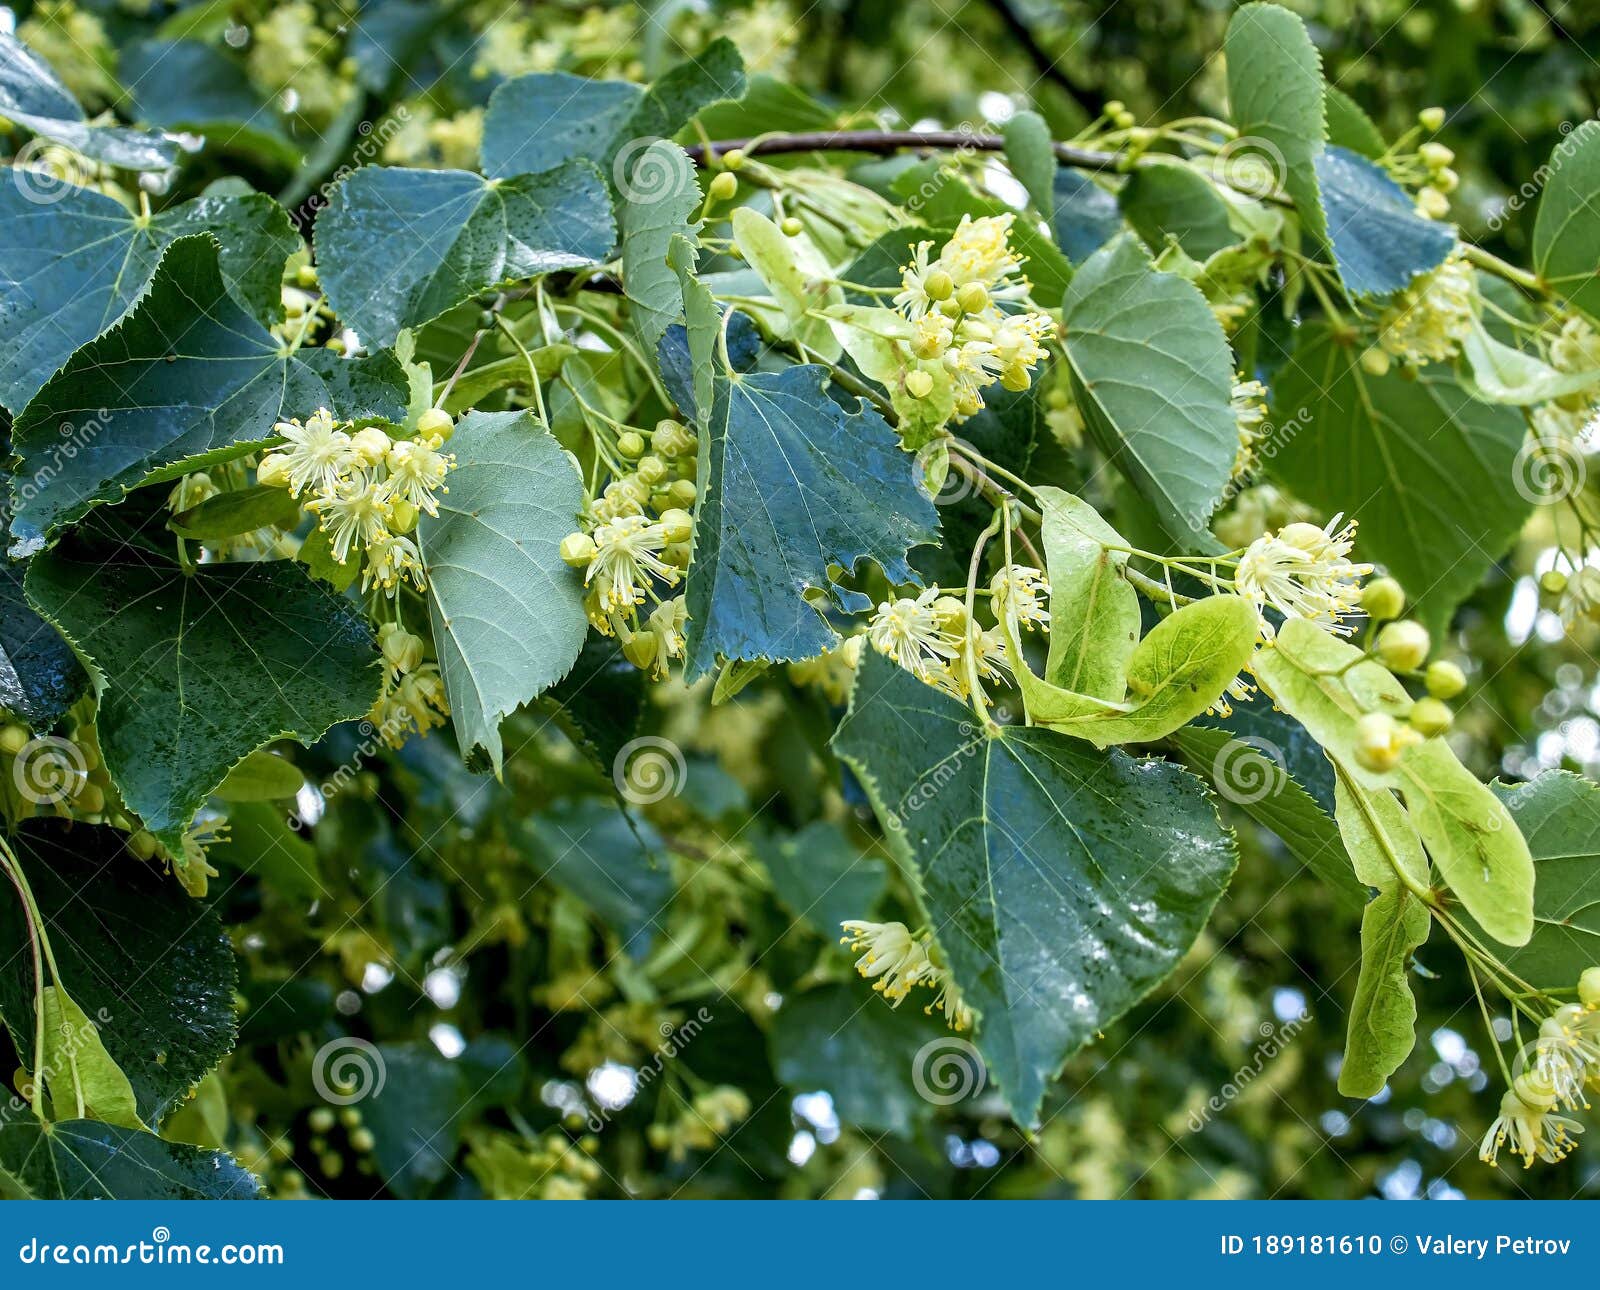 Branch of a Flowering Linden Tree with the Latin Name Tilia, Flowers ...